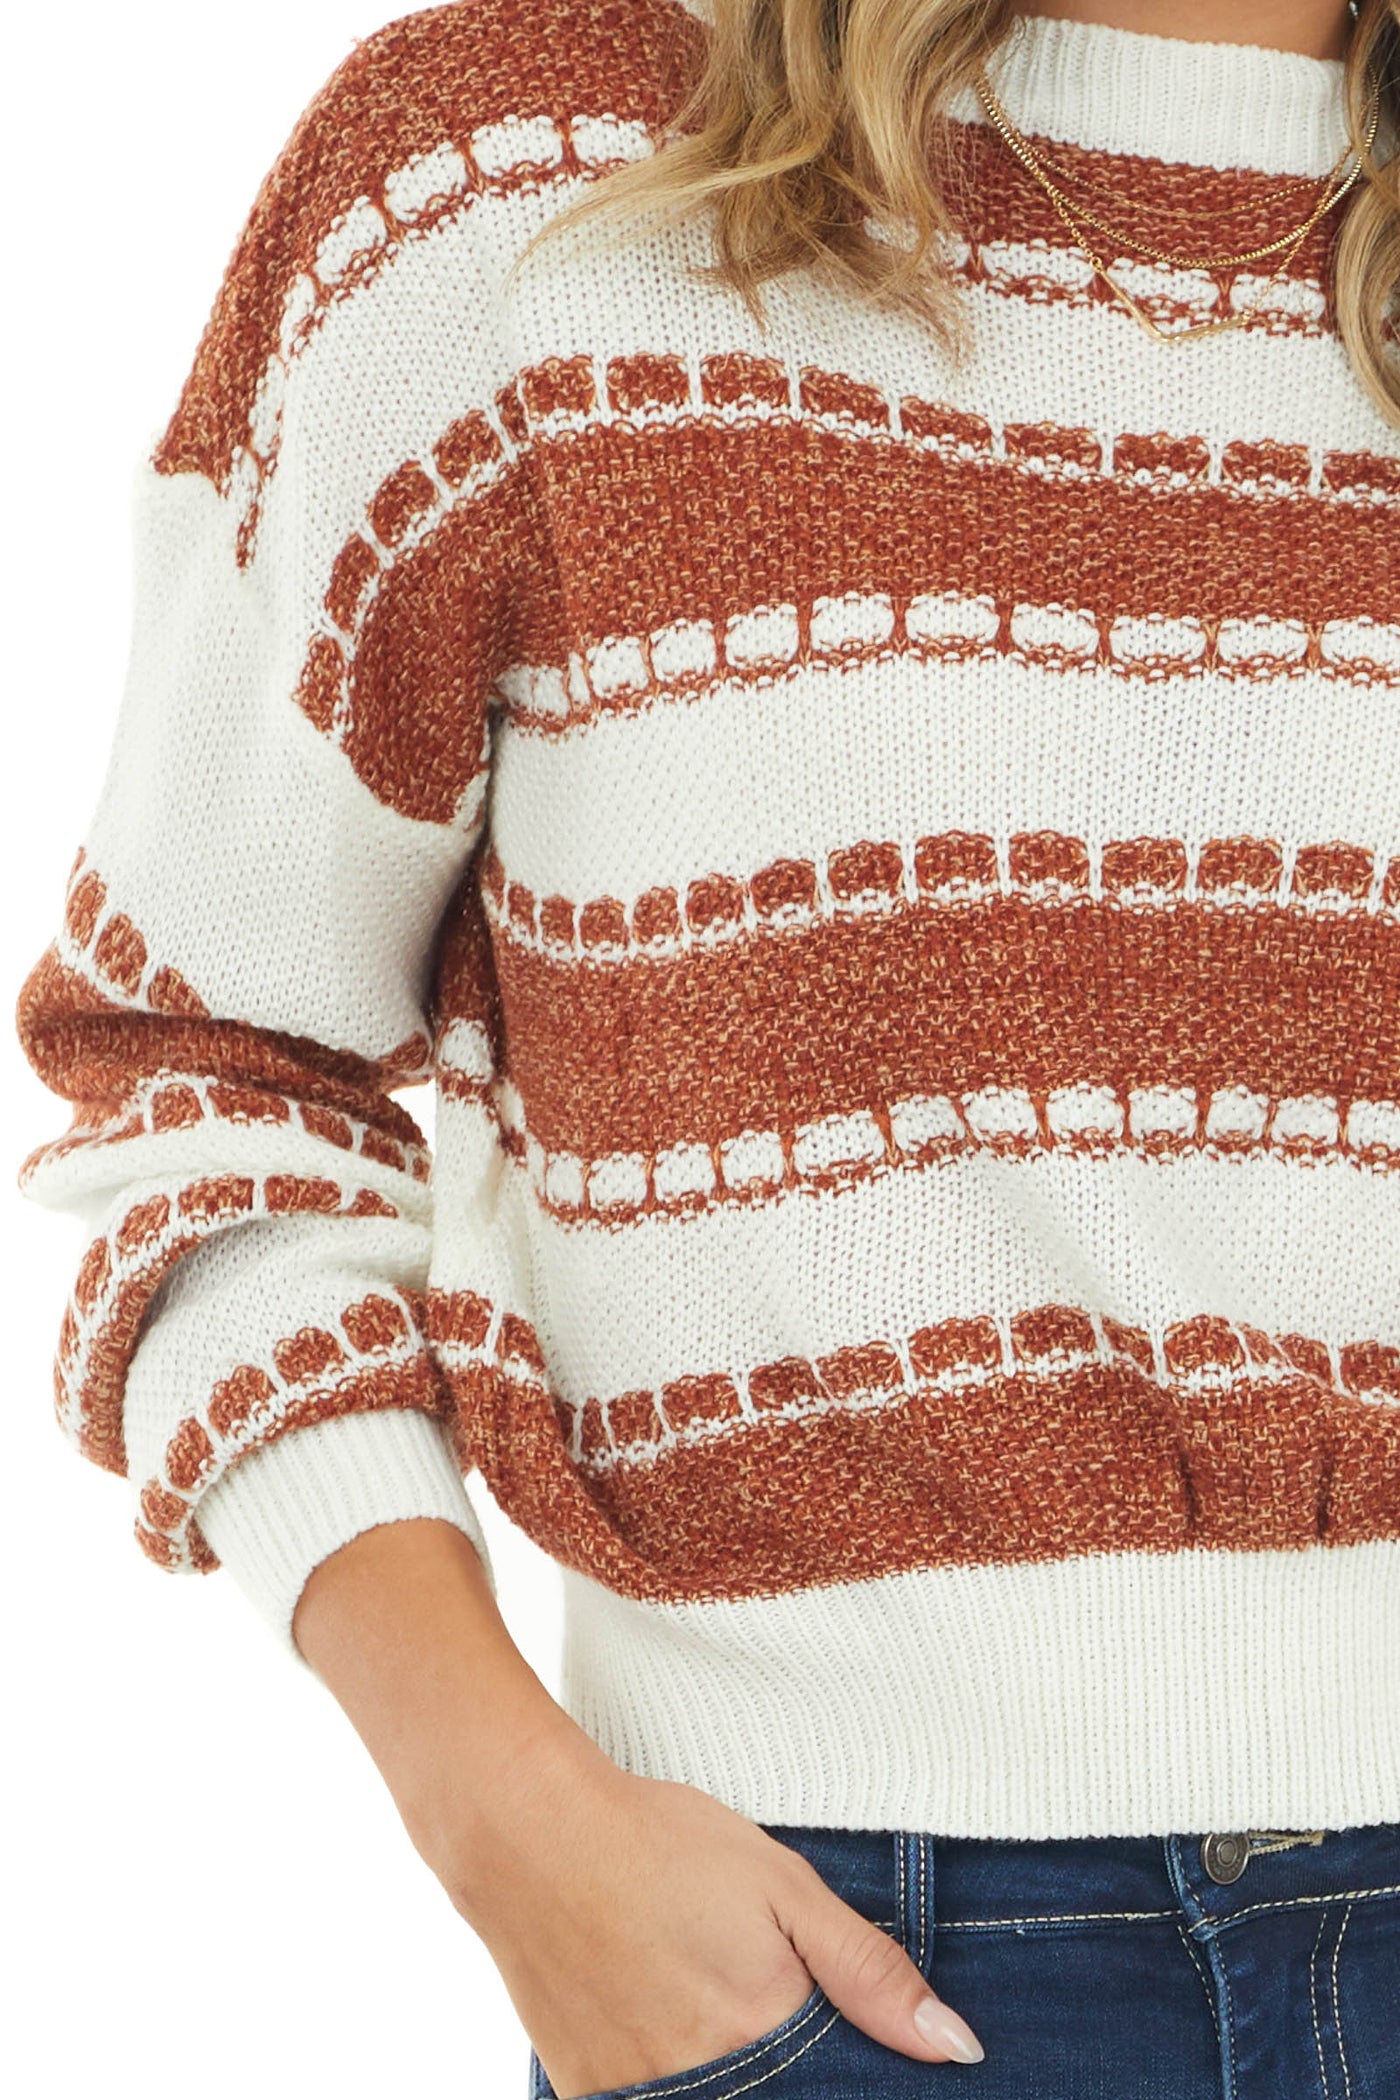 Spice and Off White Stripe Patterned Knit Sweater